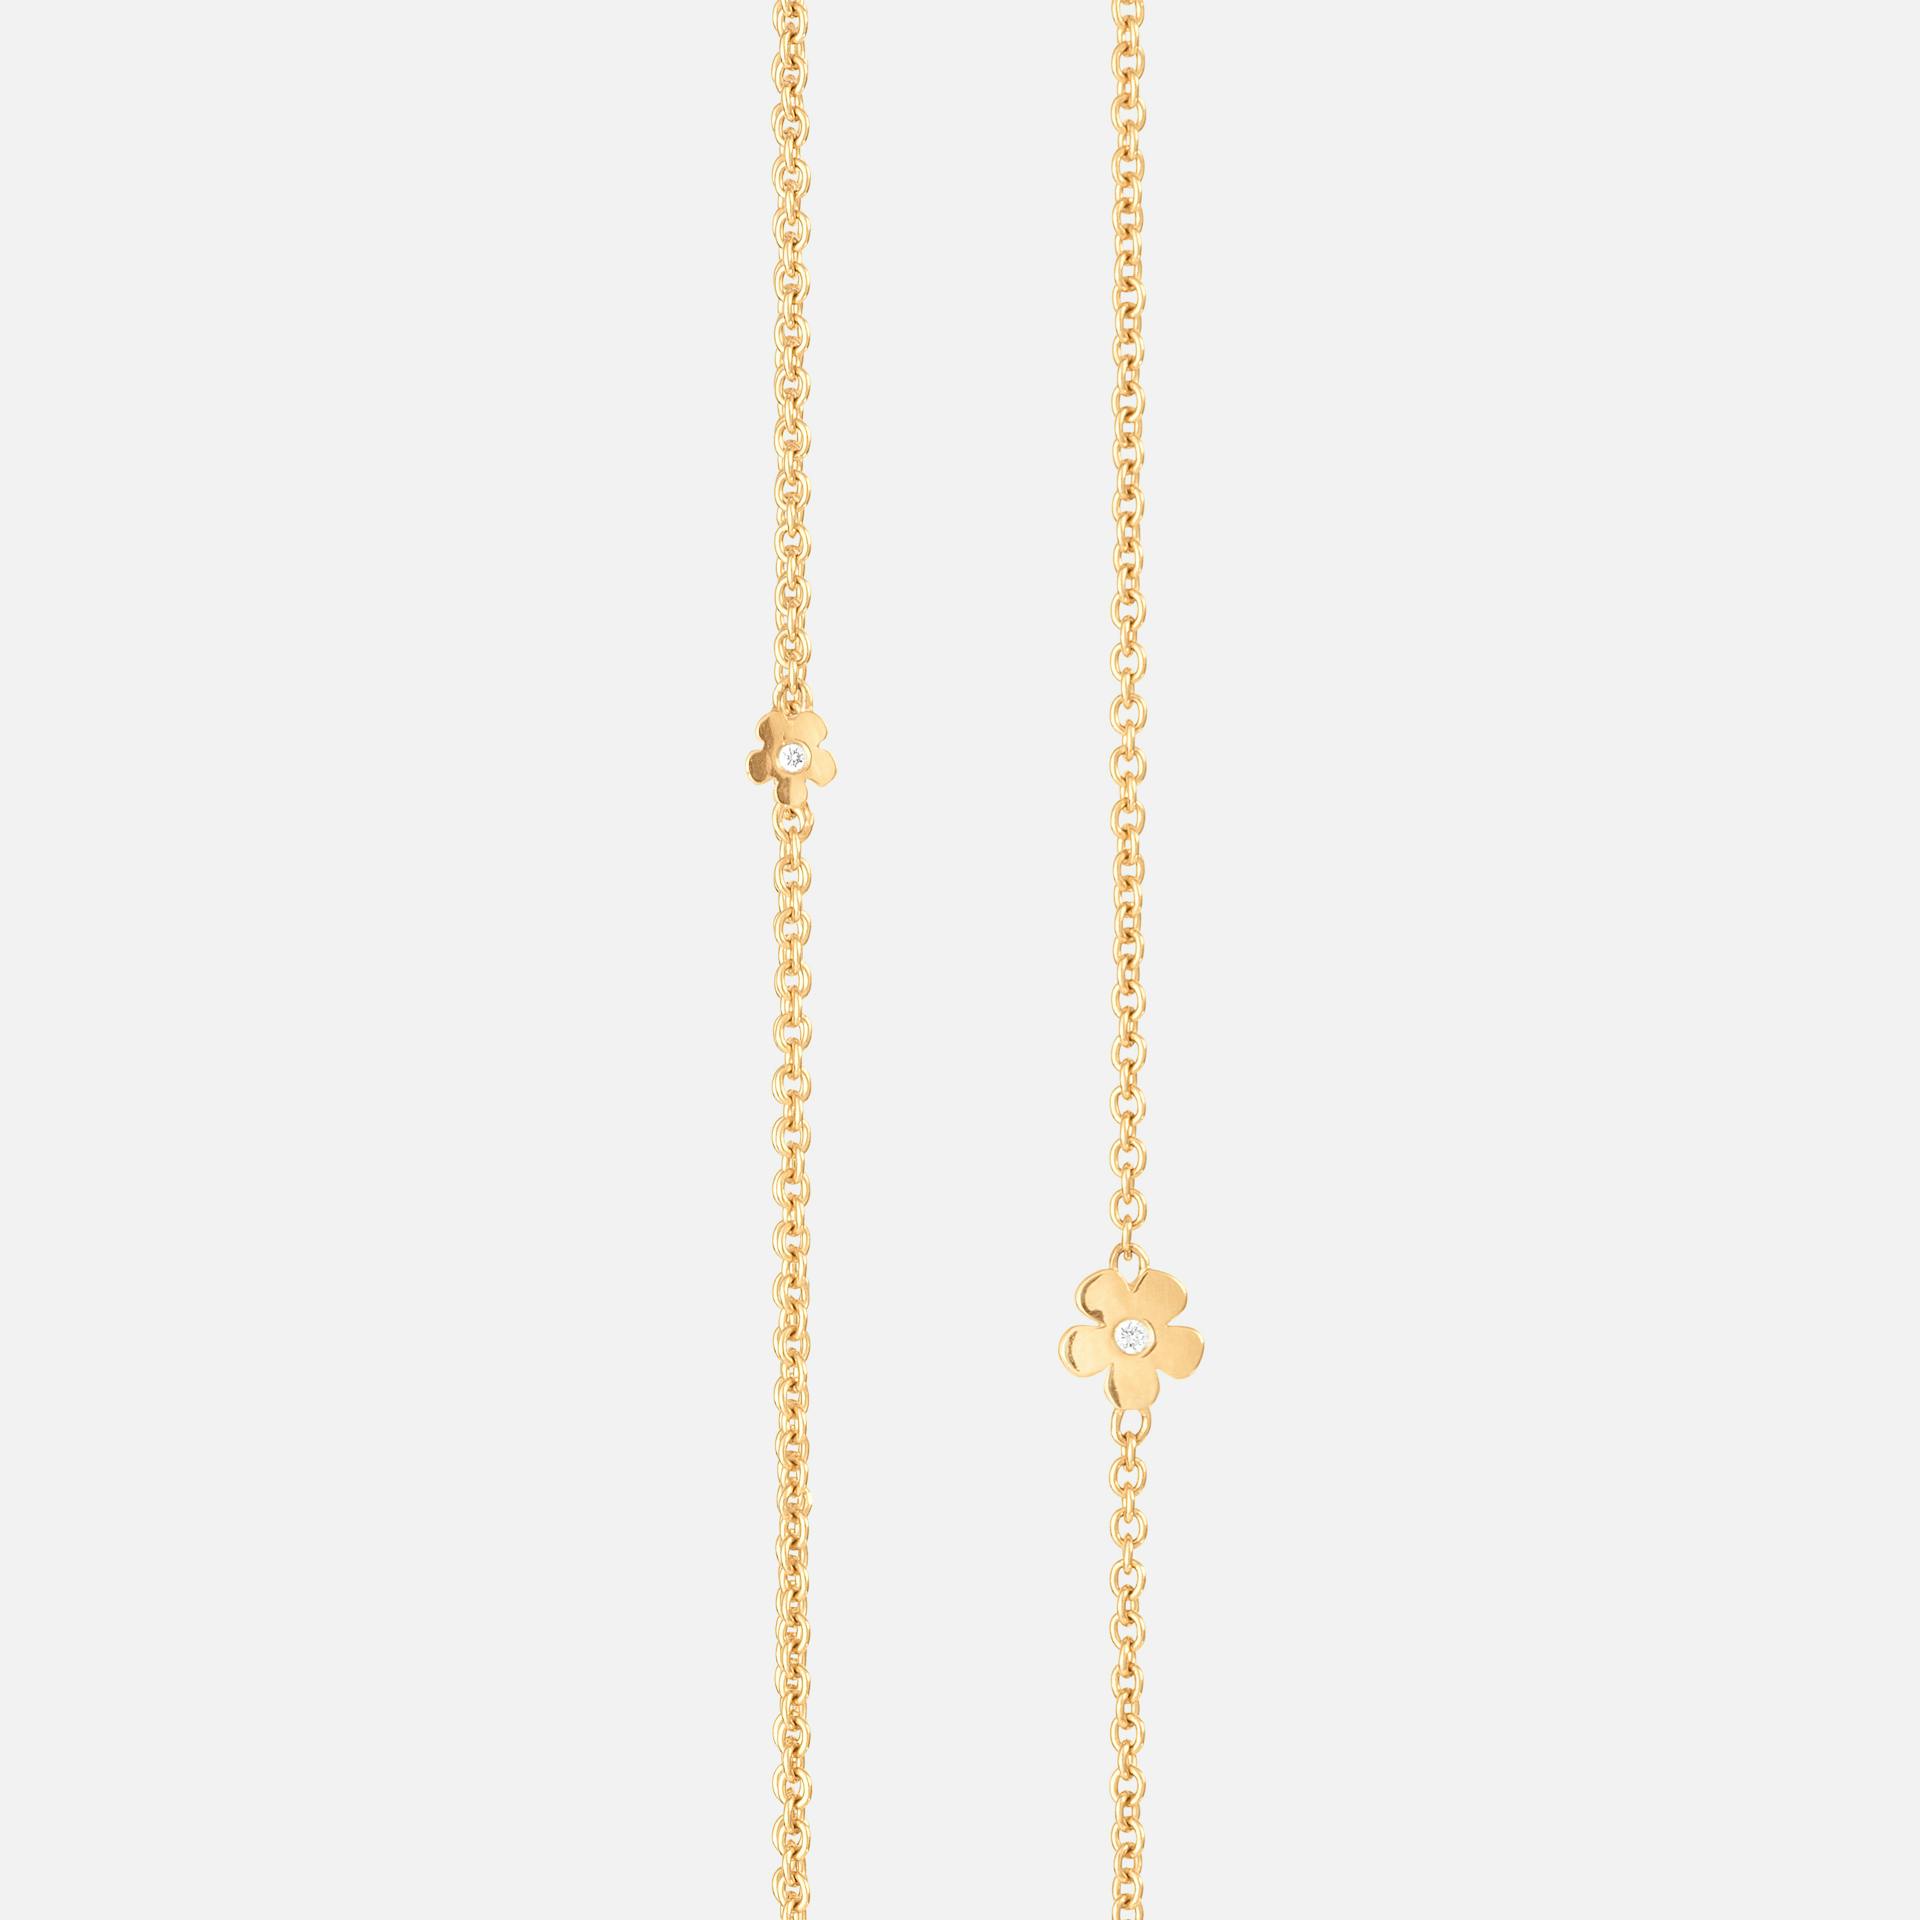 Lace Gold Collier, 80 cm with Carabine Fastening   |  Ole Lynggaard Copenhagen   